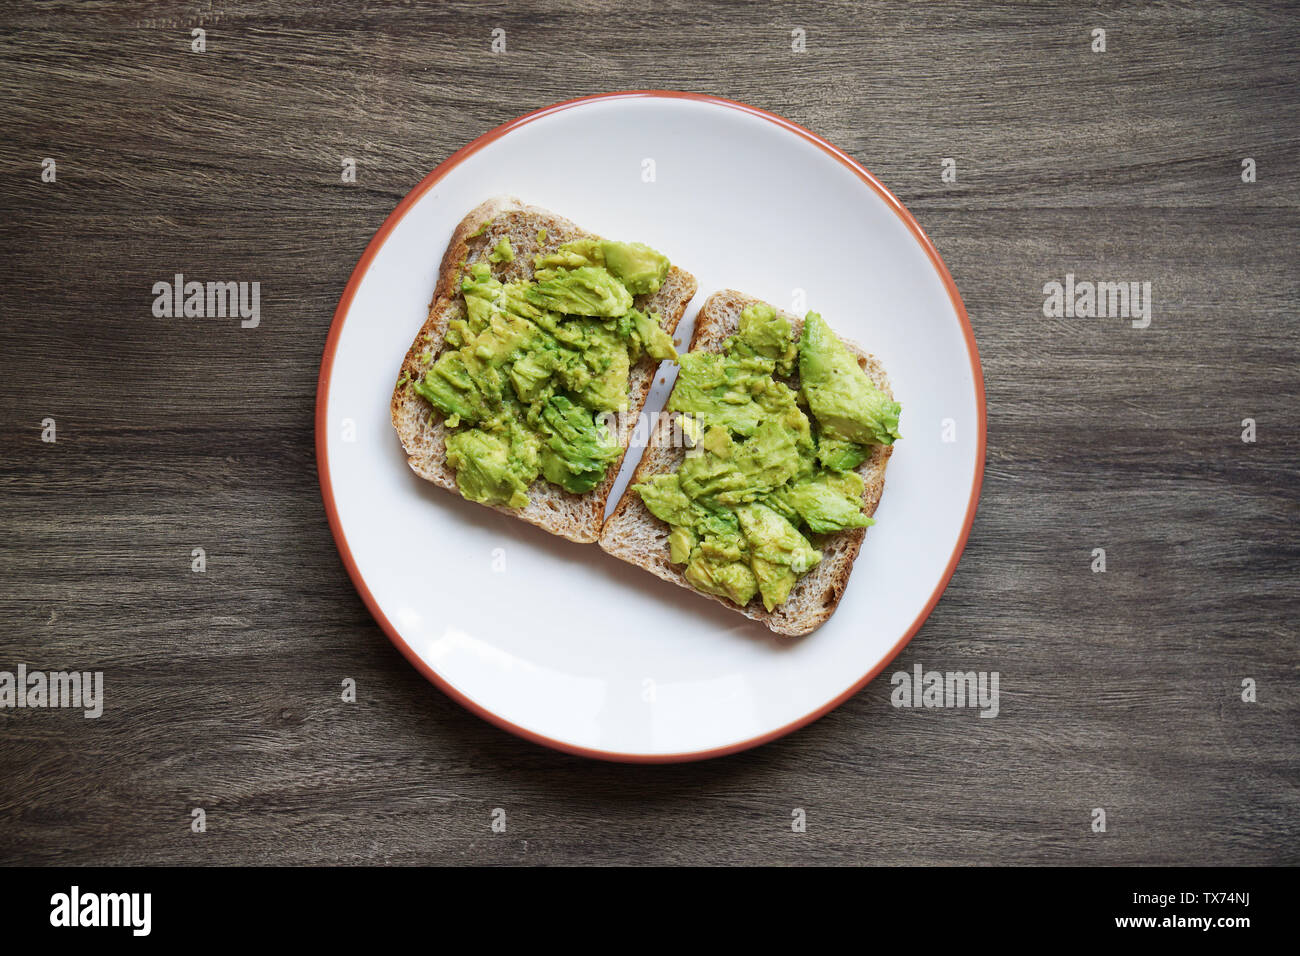 top view of two slices of homemade avocado toast on a plate on rustic wooden table - hipster food trend Stock Photo